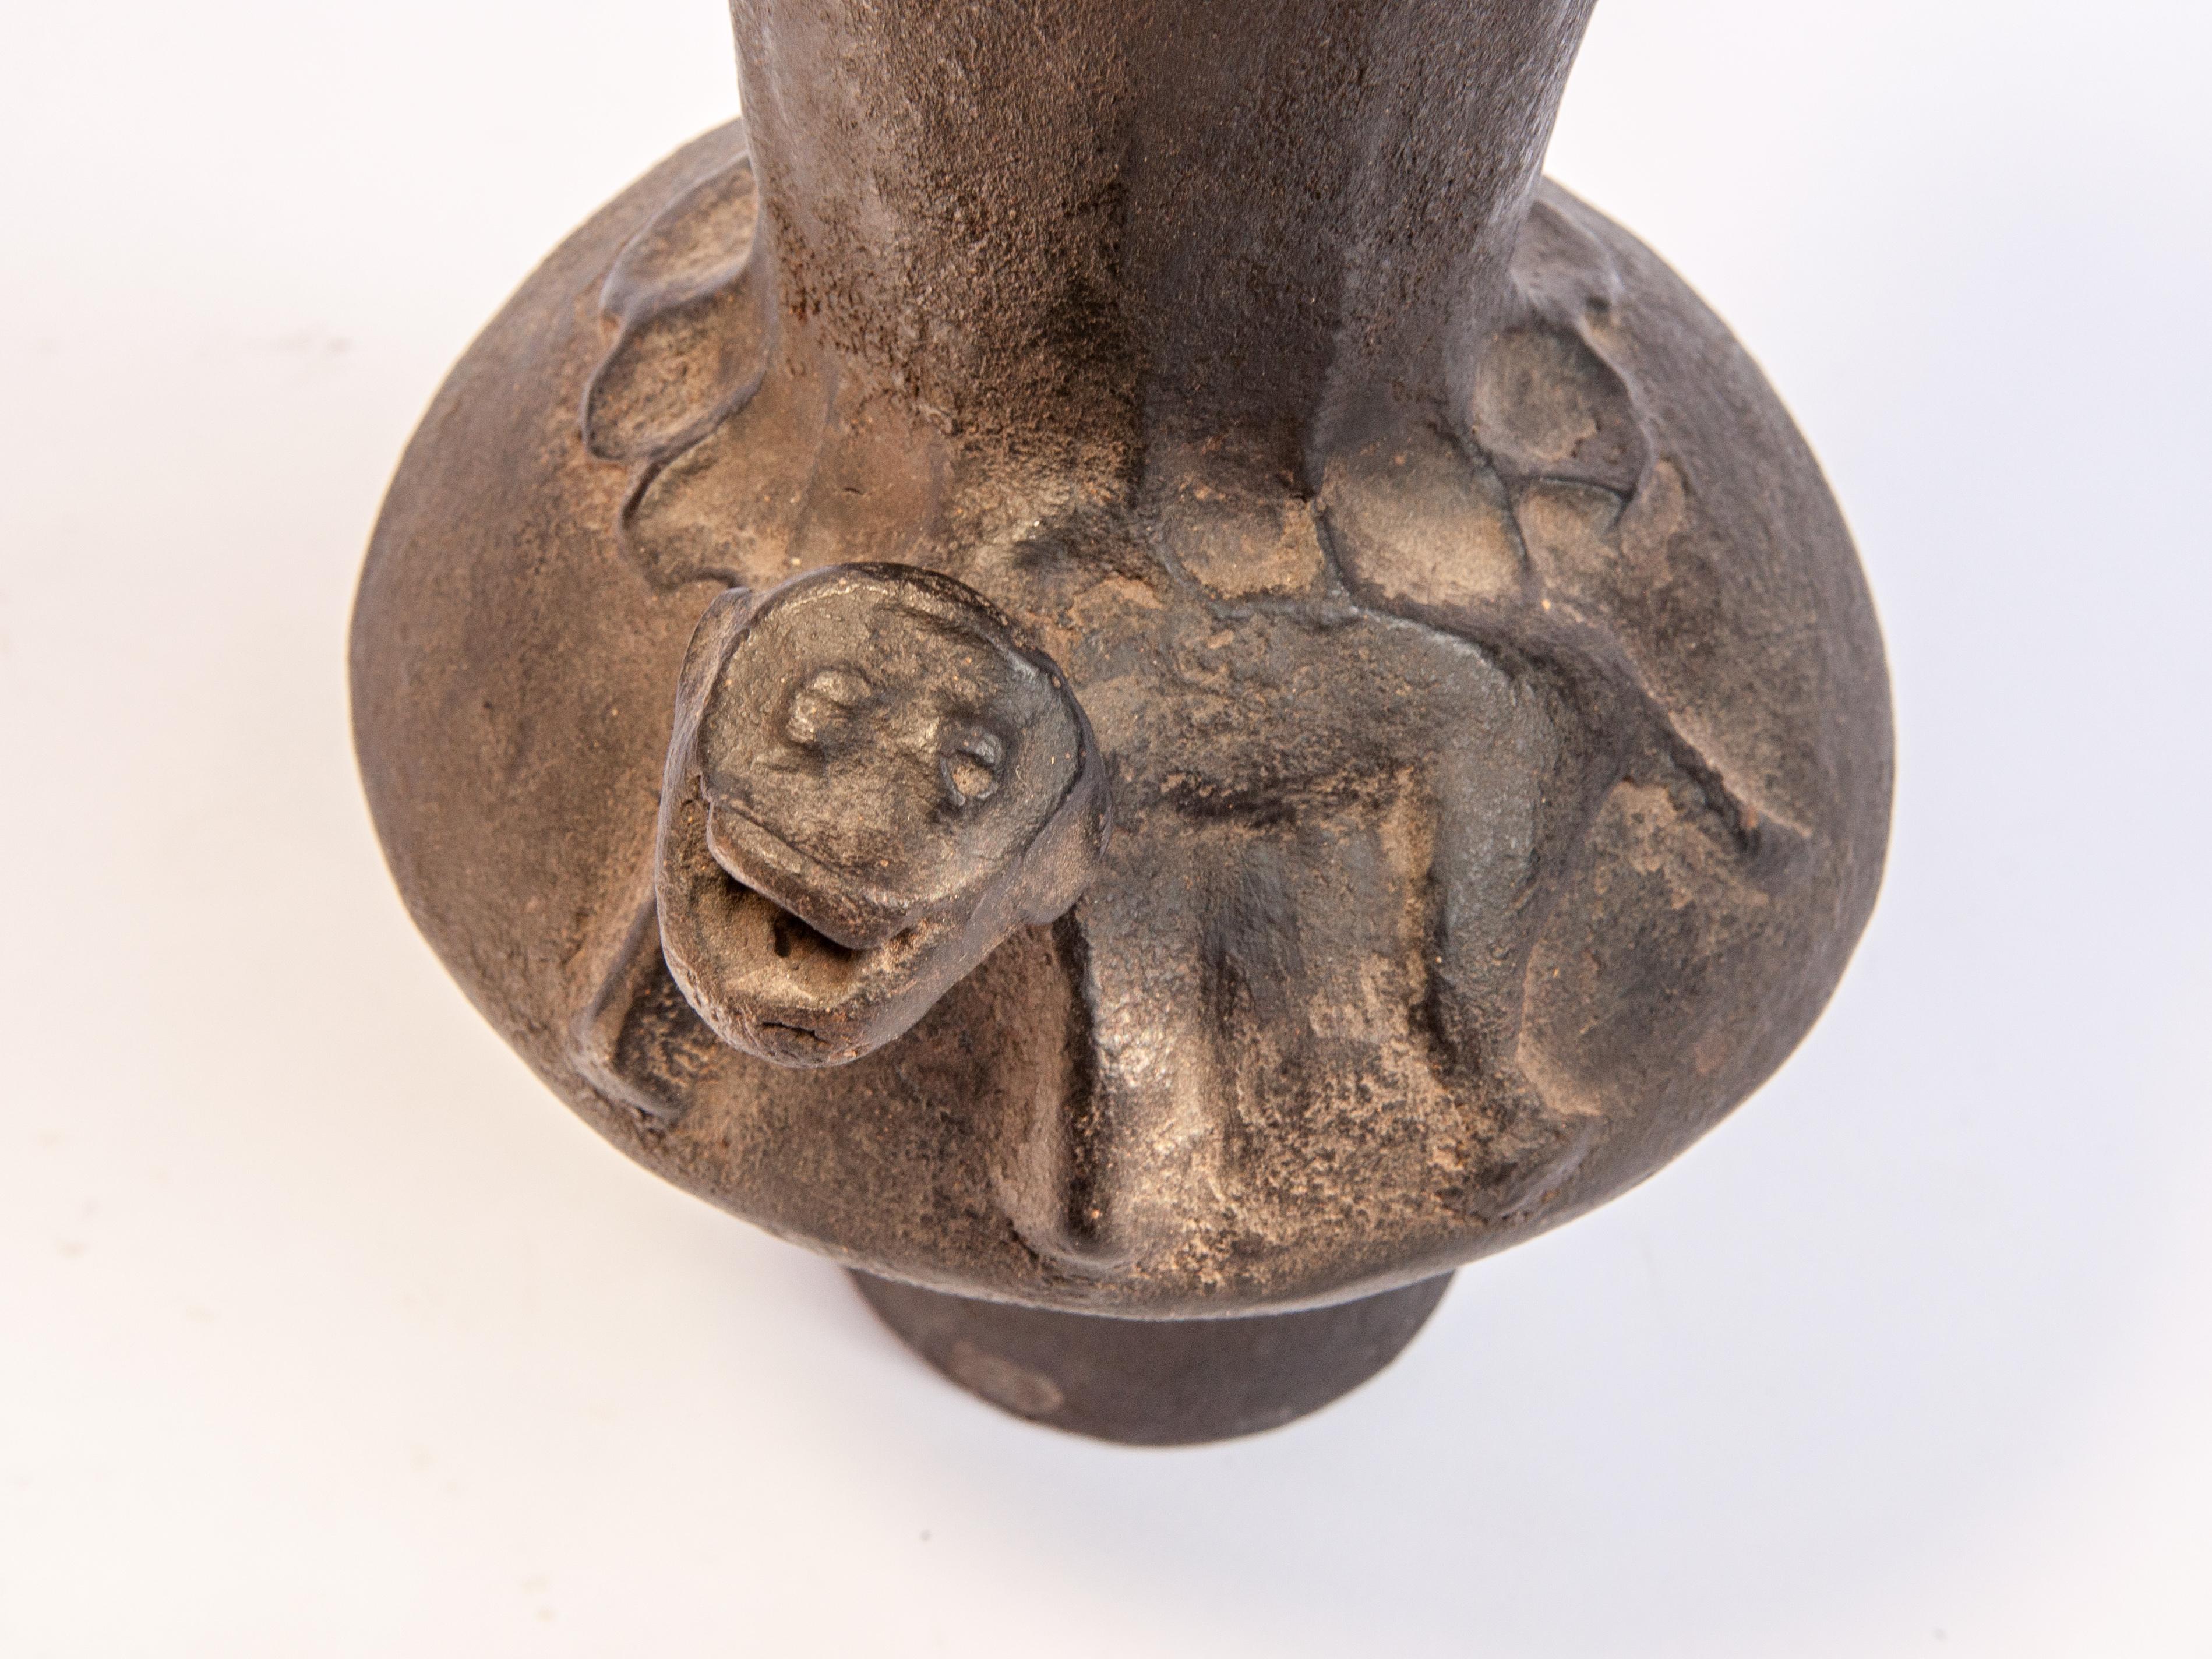 Mid-20th century Earthenware pot from Sumba, East Indonesia, with monkey motif. 9.5 inches tall.
This low fired and hand shaped pot comes from the eastern Indonesian island of Sumba, and was most likely used to prepare herbal mixtures or medicines.